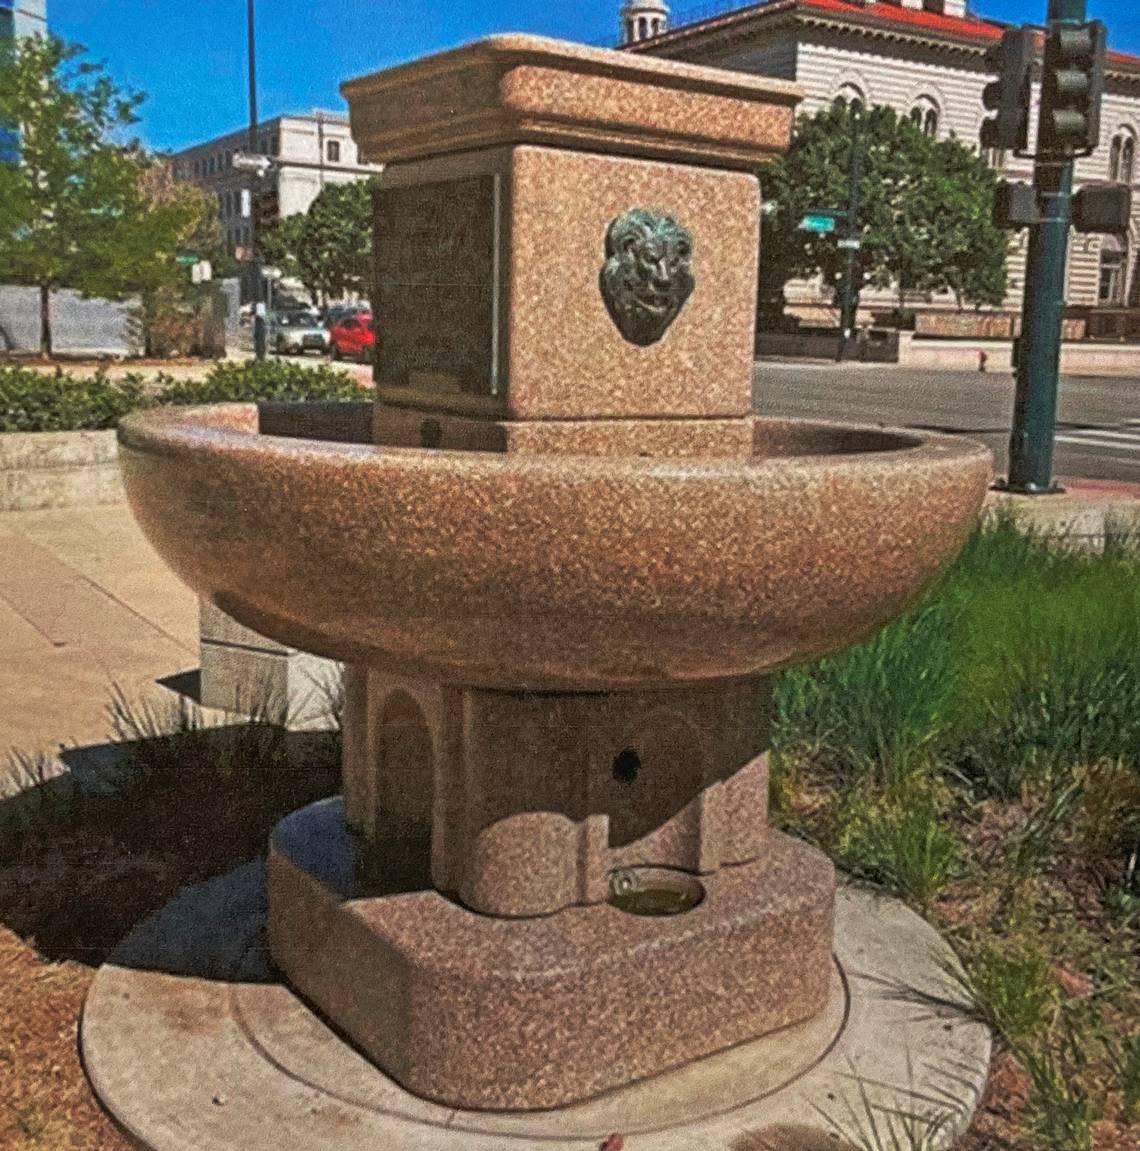 This missing pieces of the Fort Worth fountain include a base with bowls for cats and dogs and a middle piece with a lion head as a spout.